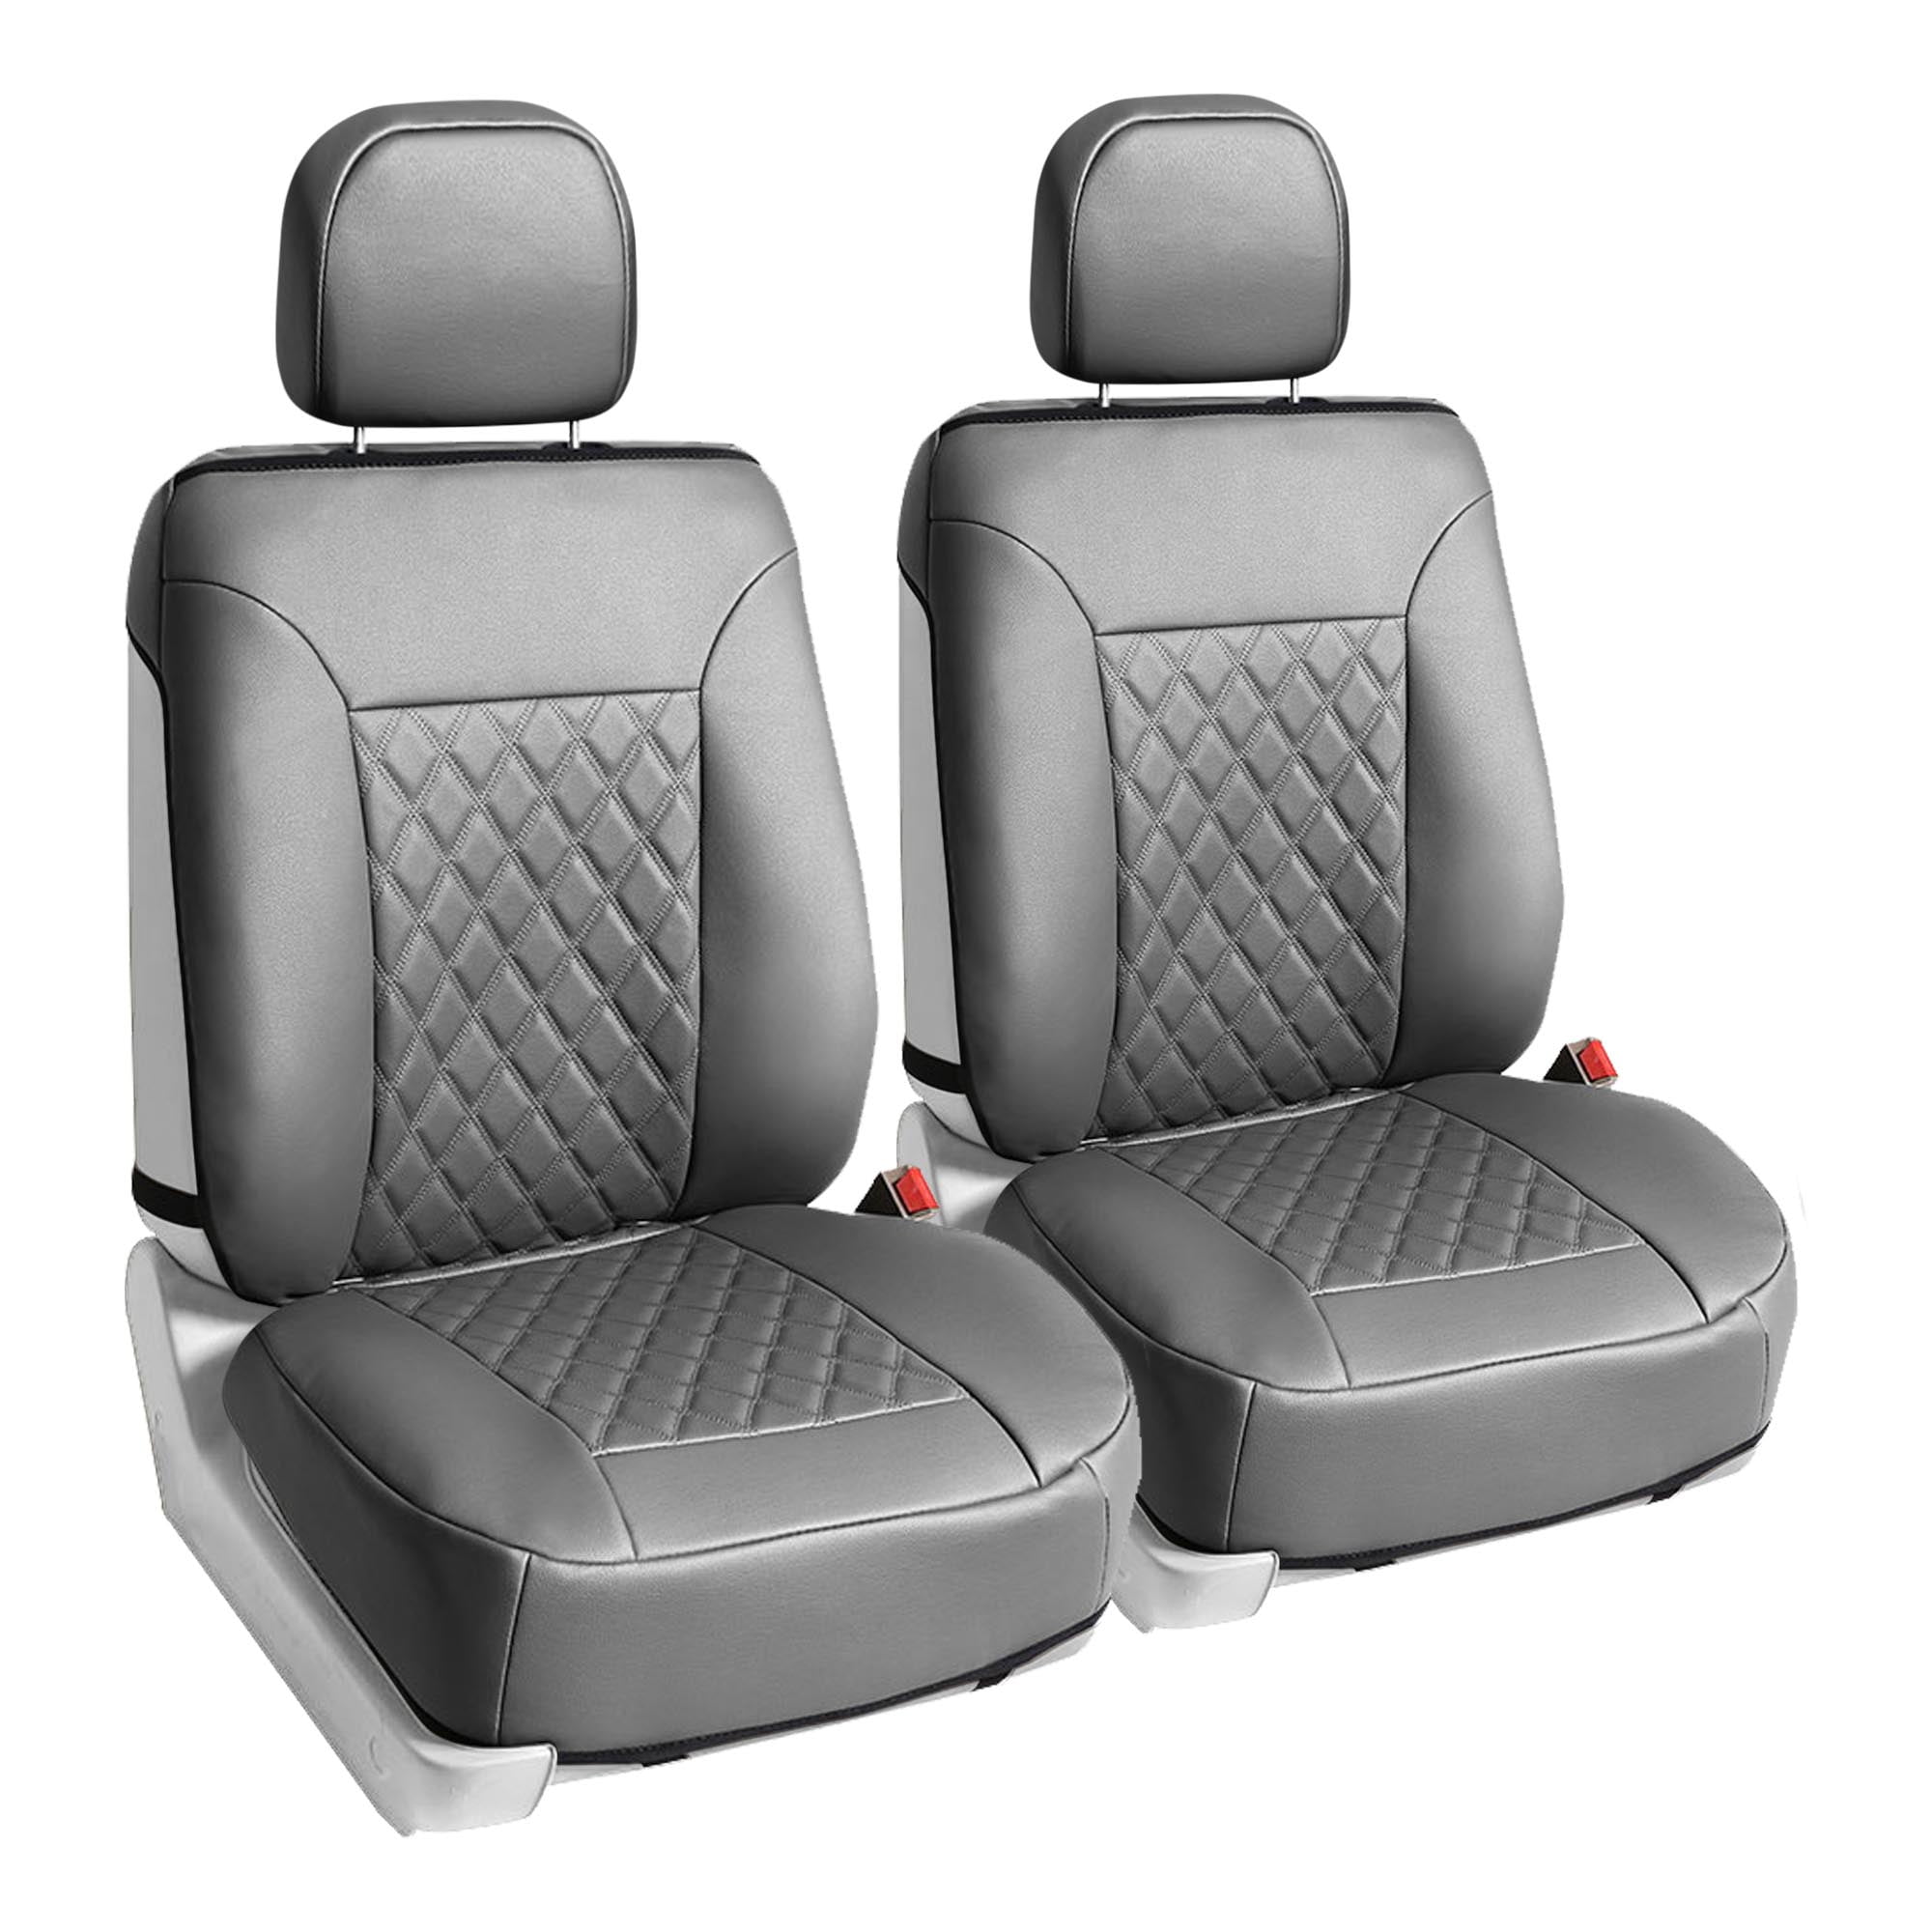 FH Group Universal Faux Leather Diamond Deluxe Front Seat Car Cushion Covers Grey Universal Fit Car Seat Covers